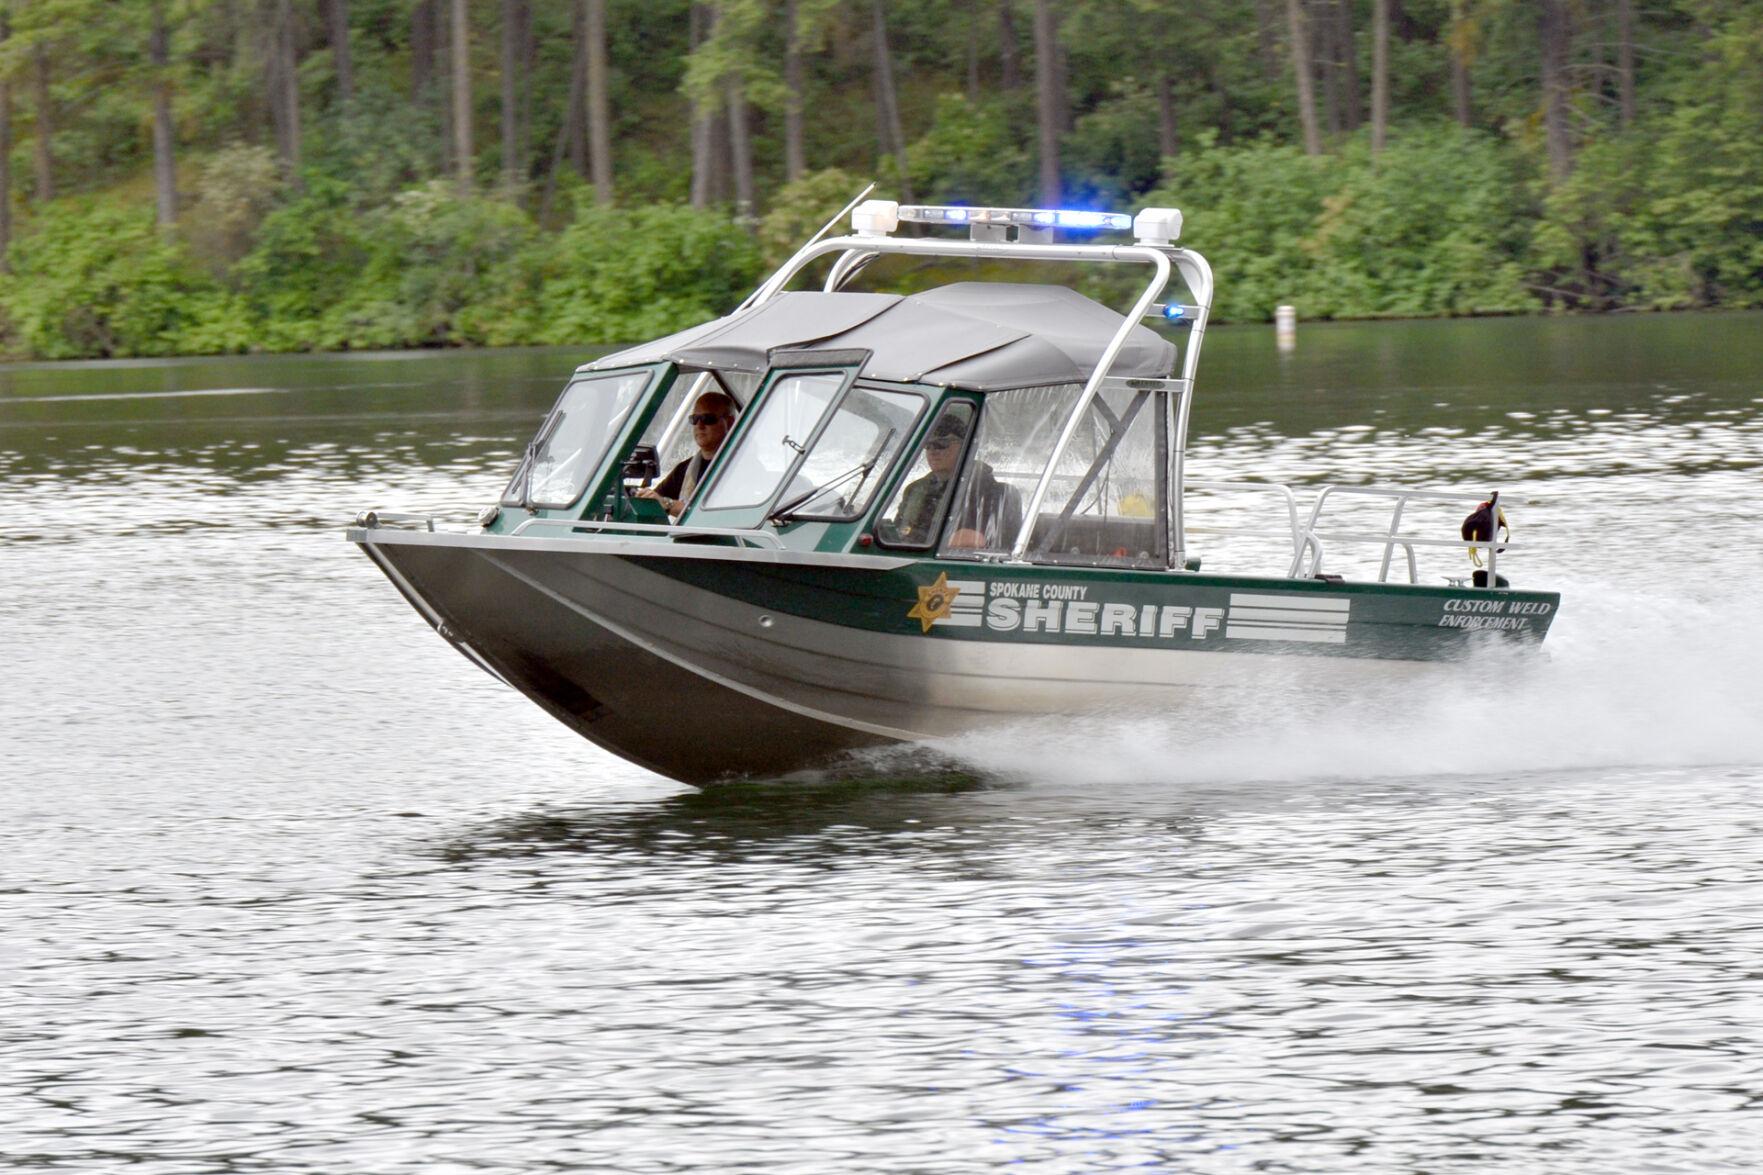 Spokane County Sheriffs Office joins Operation Dry Water for a safe boating season [Video]